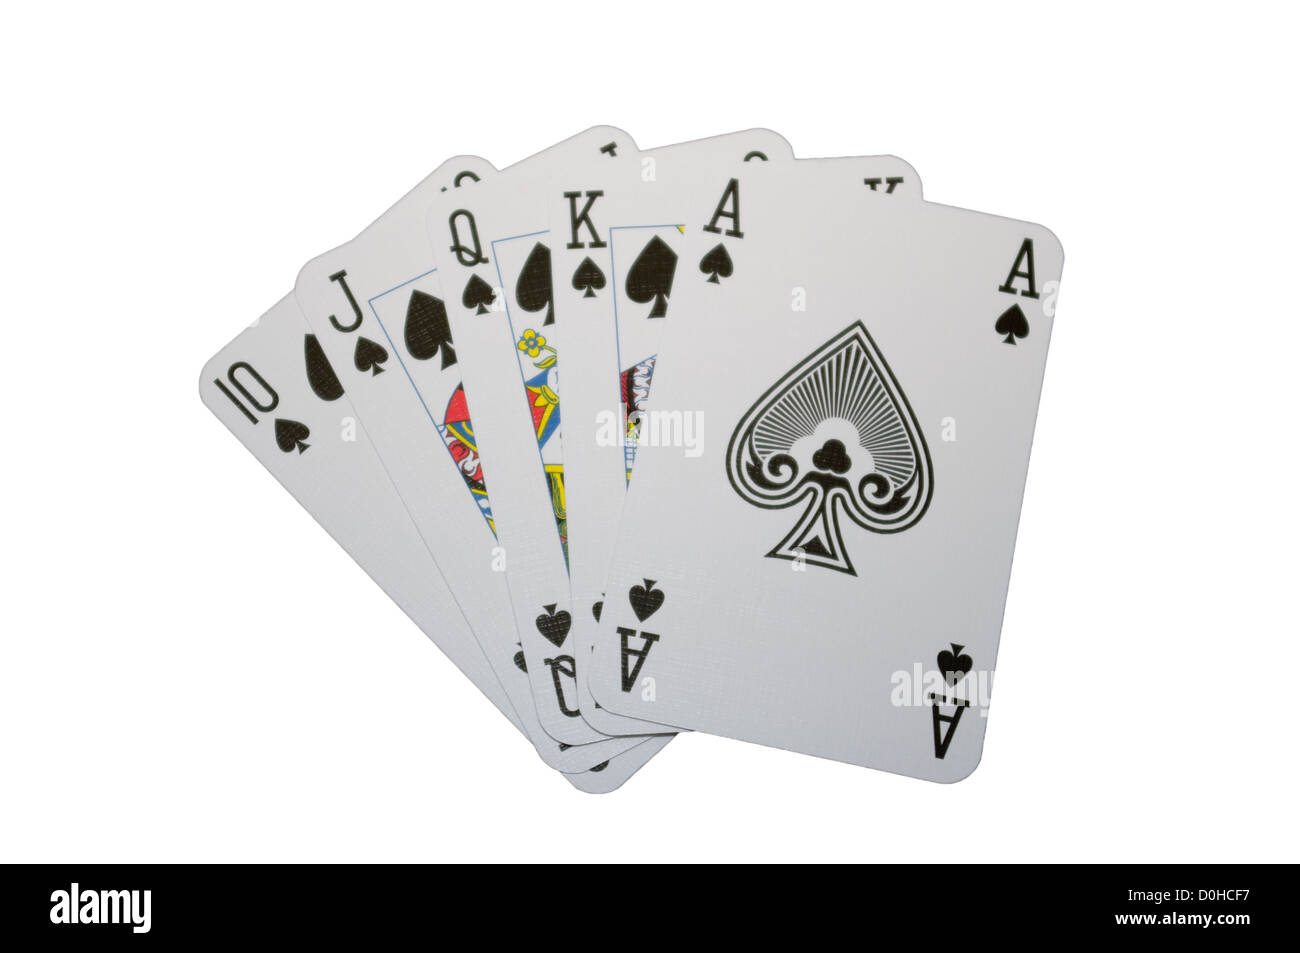 Royal Aces Cards